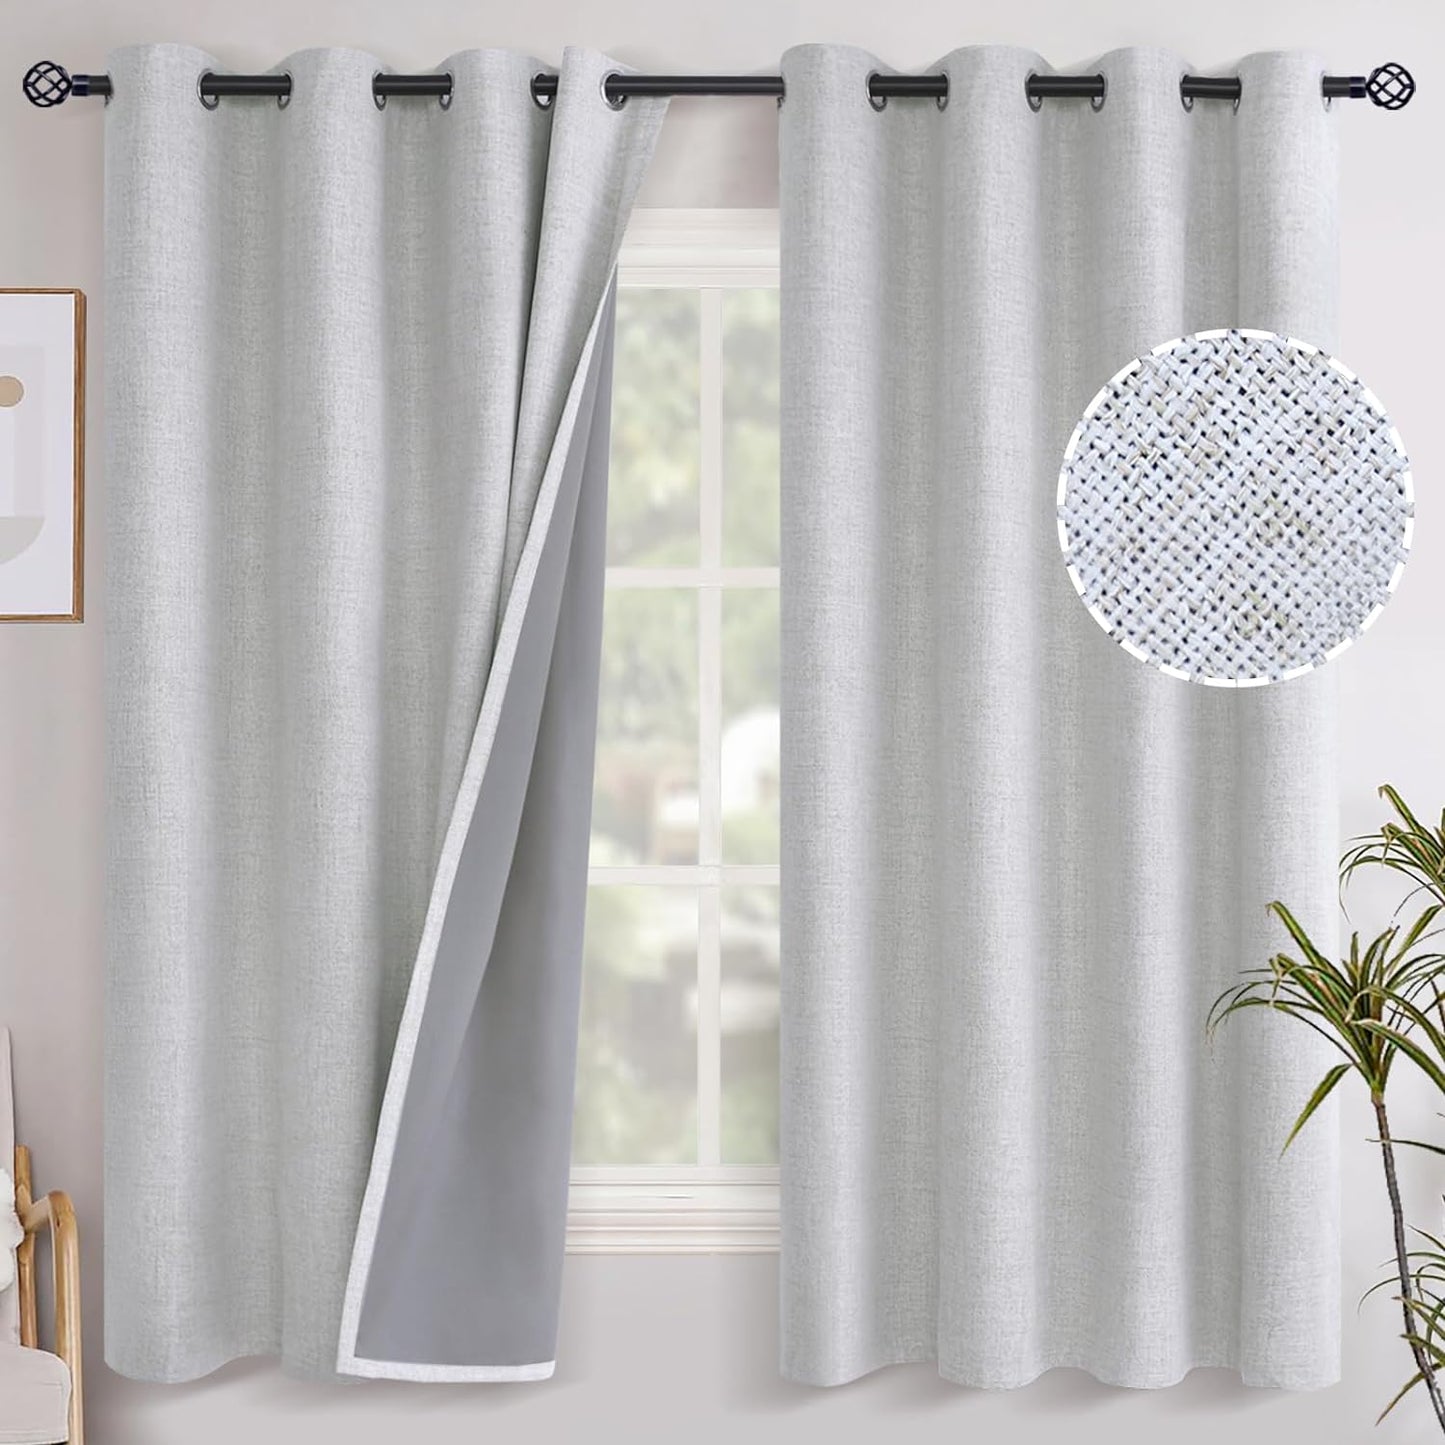 Youngstex Linen Blackout Curtains 63 Inch Length, Grommet Darkening Bedroom Curtains Burlap Linen Window Drapes Thermal Insulated for Basement Summer Heat, 2 Panels, 52 X 63 Inch, Beige  YoungsTex Linen 52W X 63L 